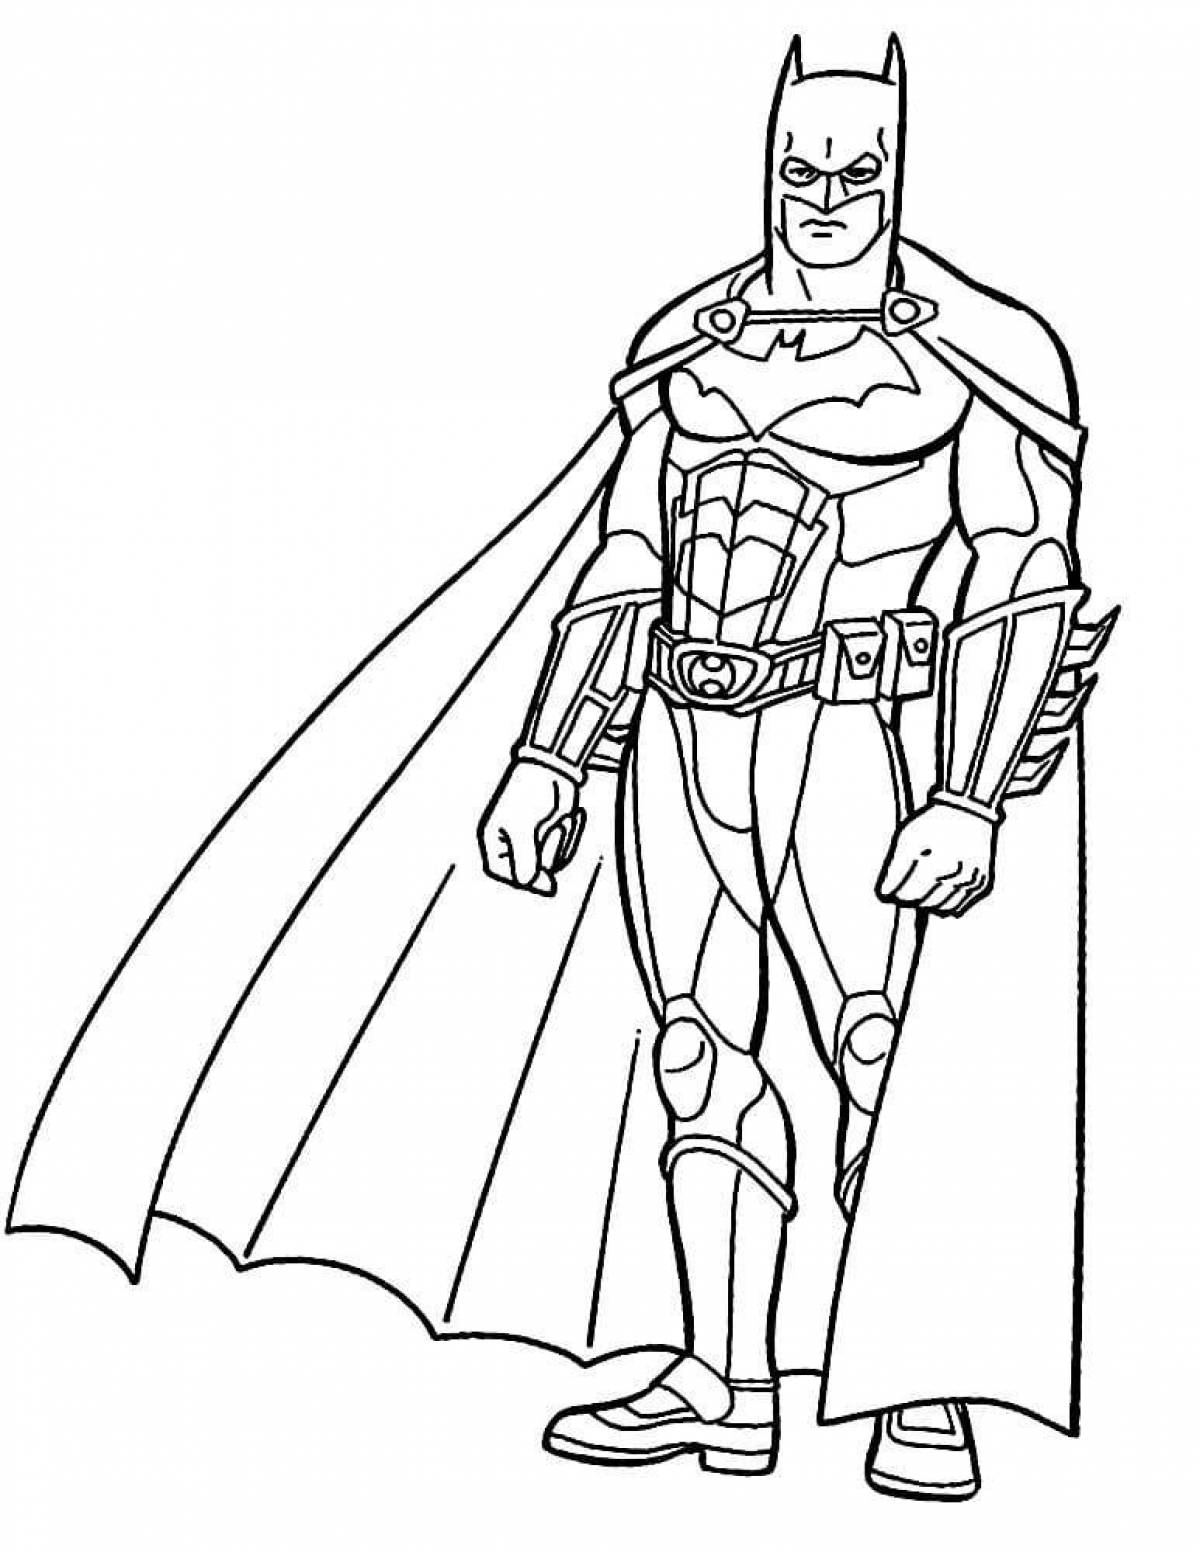 Exciting superhero coloring pages for kids